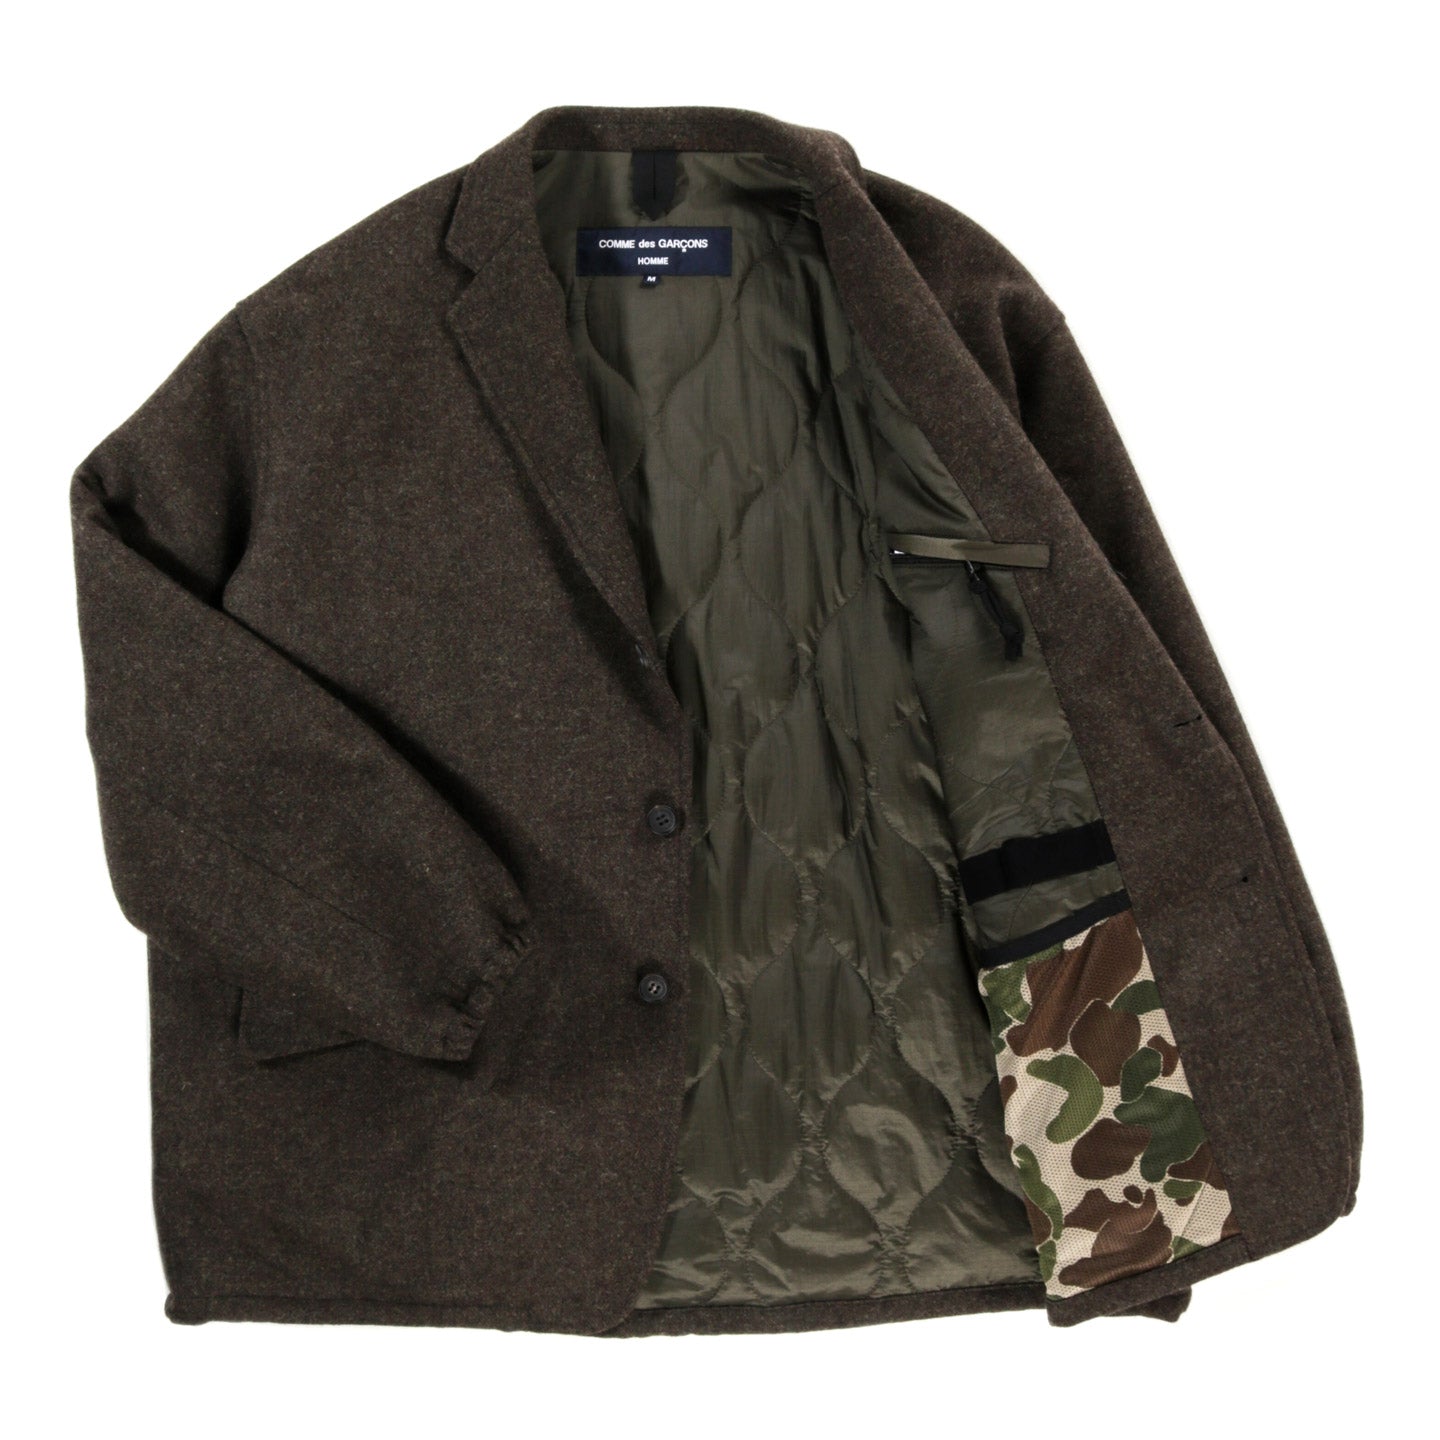 COMME DES GARCONS HOMME J018 INSULATED WOOL JACKET KHAKI